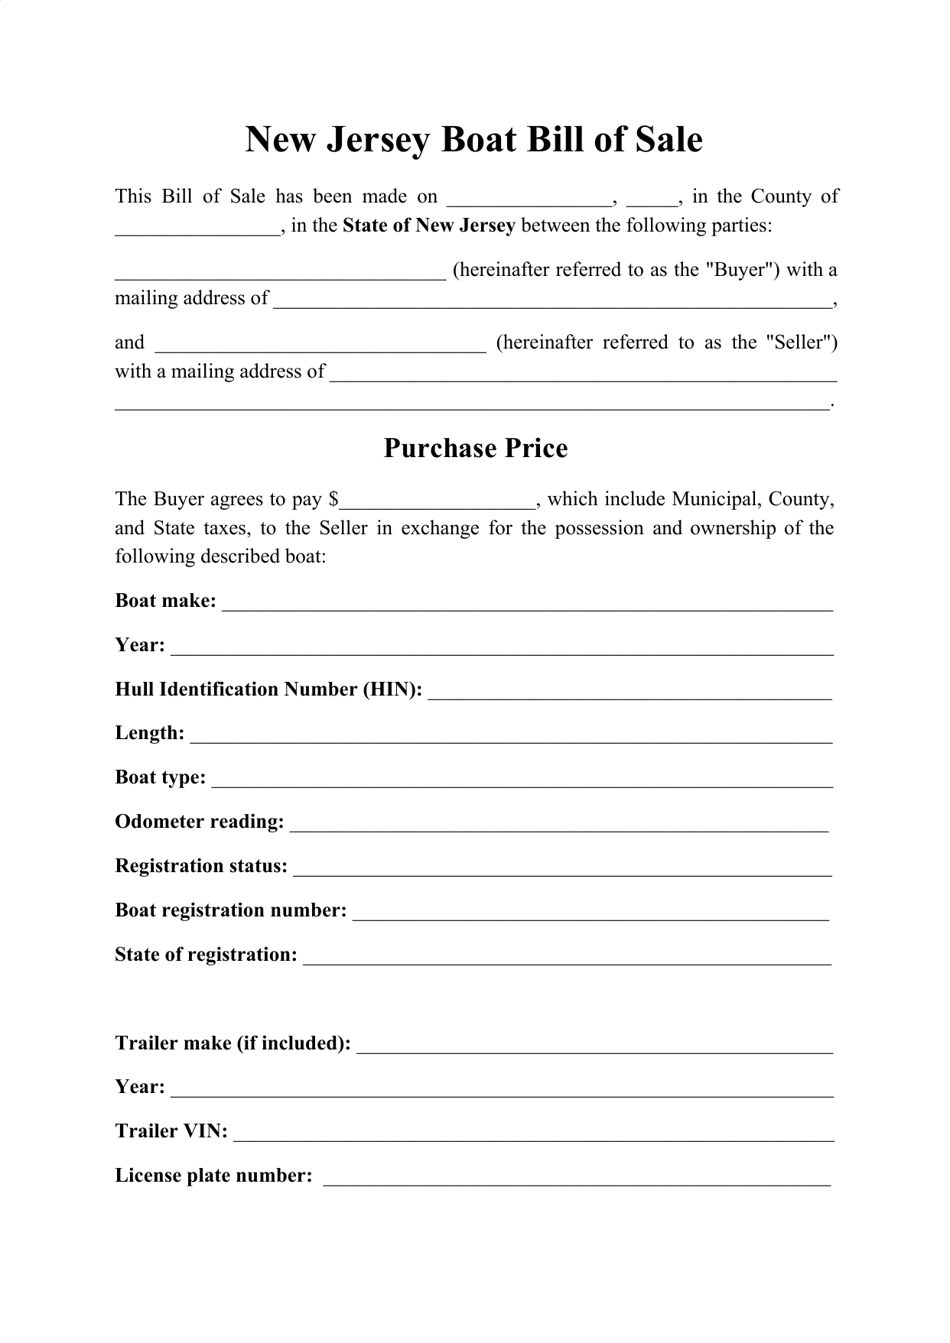 Boat Bill of Sale Form - New Jersey, Page 1